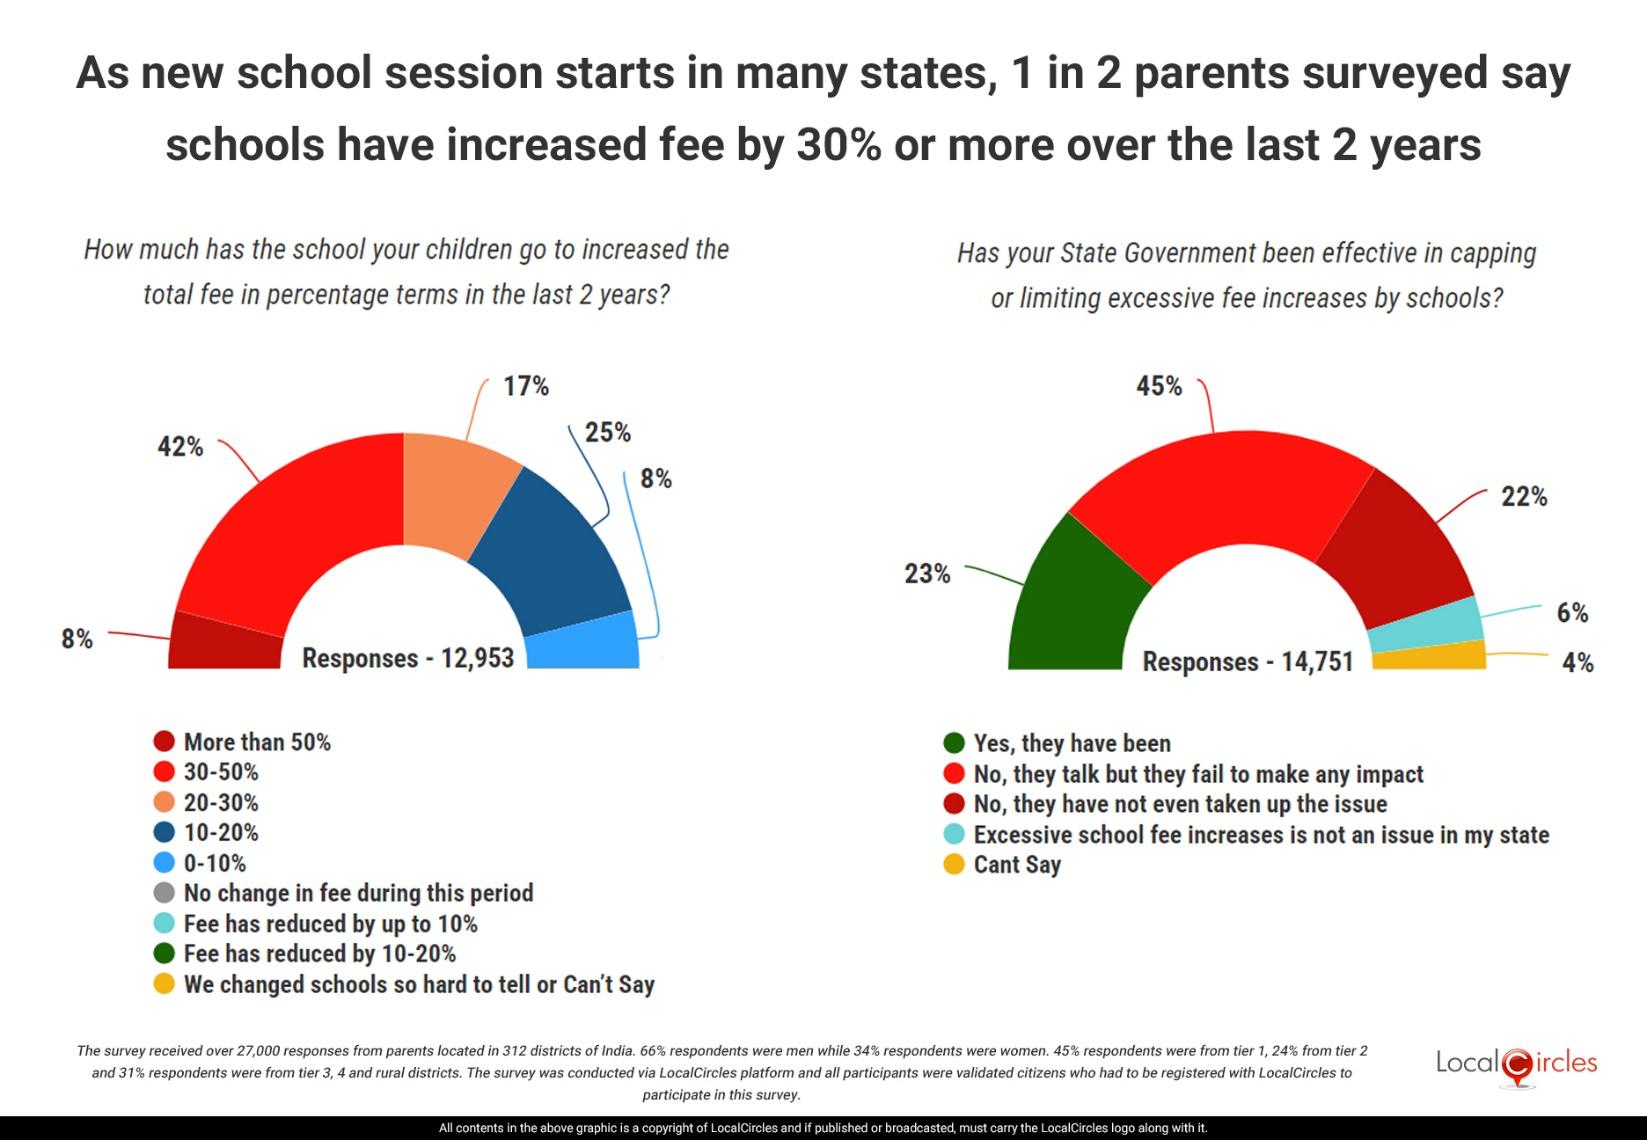 As new school session starts in many states, 1 in 2 parents surveyed say schools have increased fee by 30% or more over the last 2 years